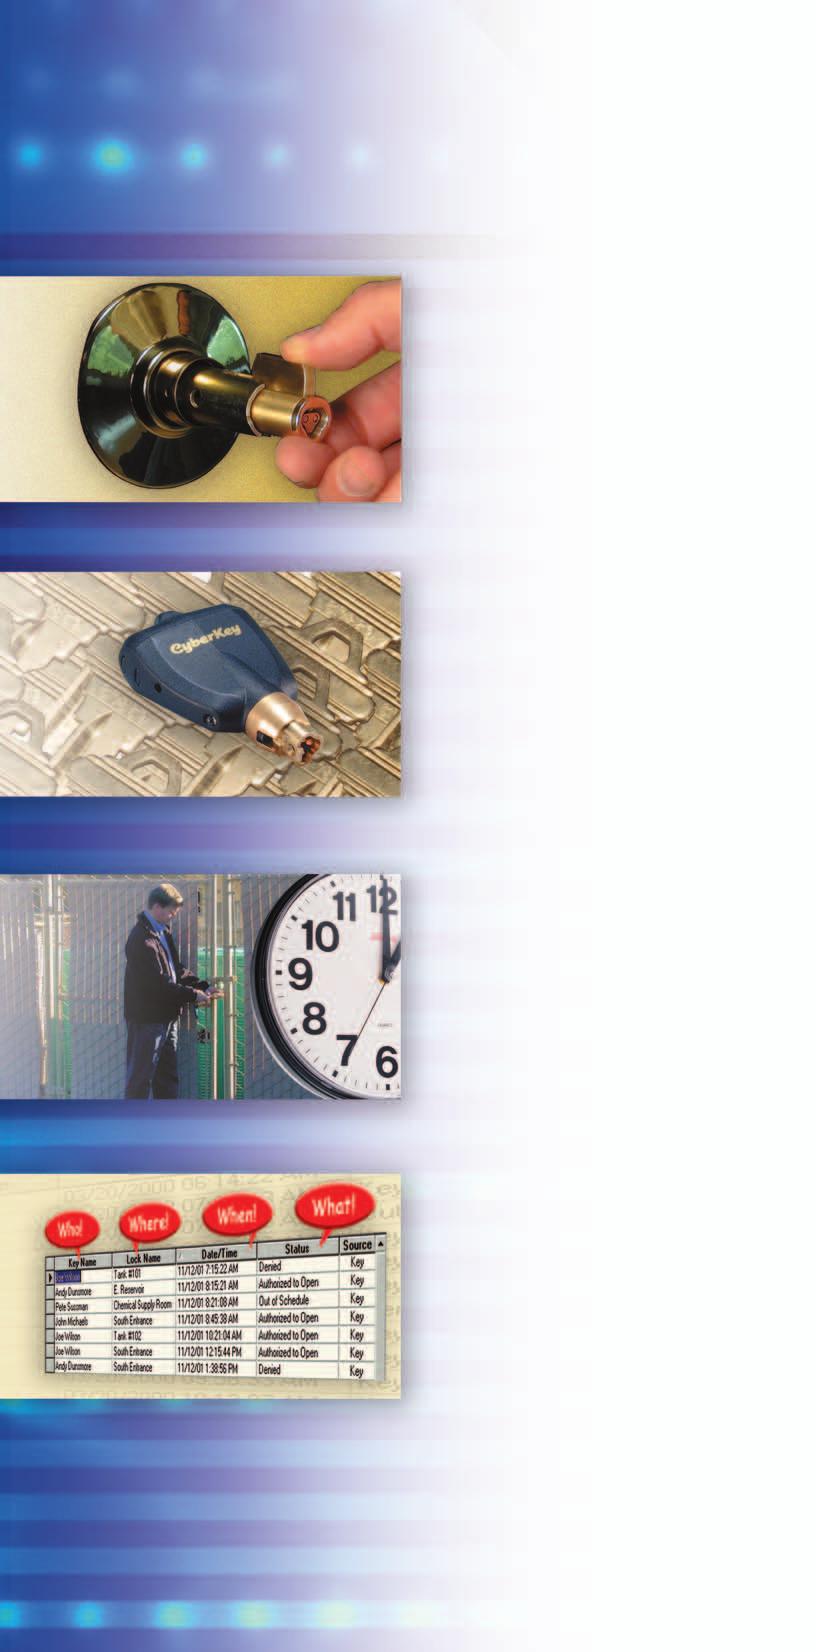 CyberLock an innovative lock system that easily converts existing mechanical locks into an access control system.